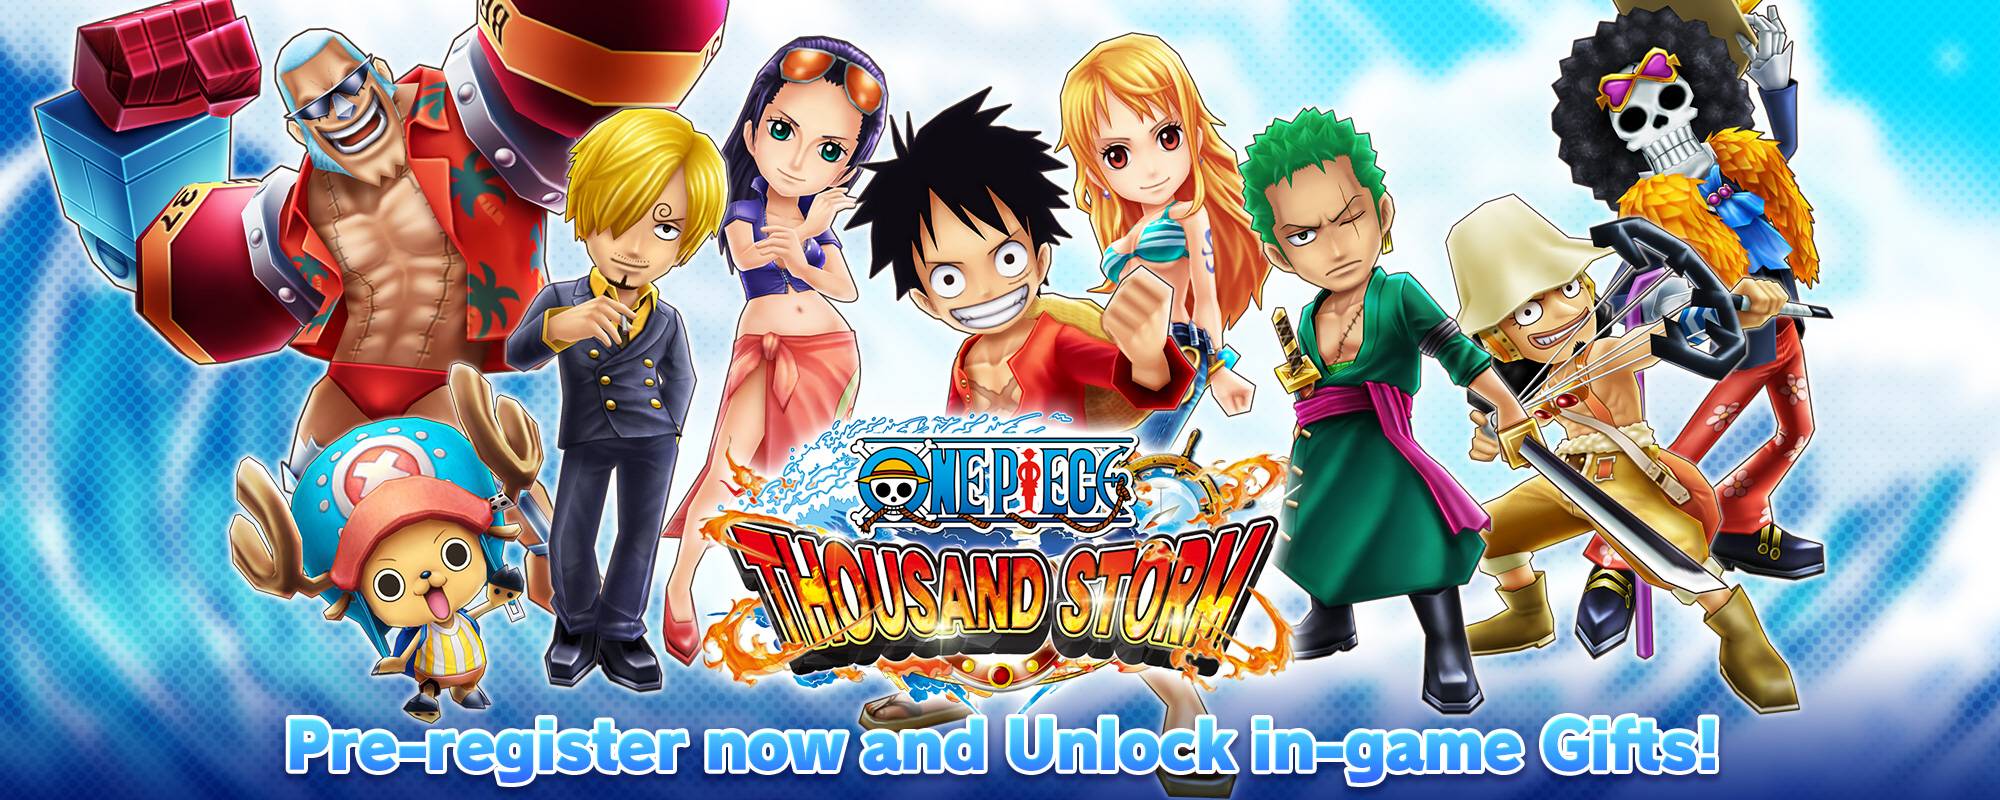 NEW Free Open World ONE PIECE Mobile Game is AMAZING! 